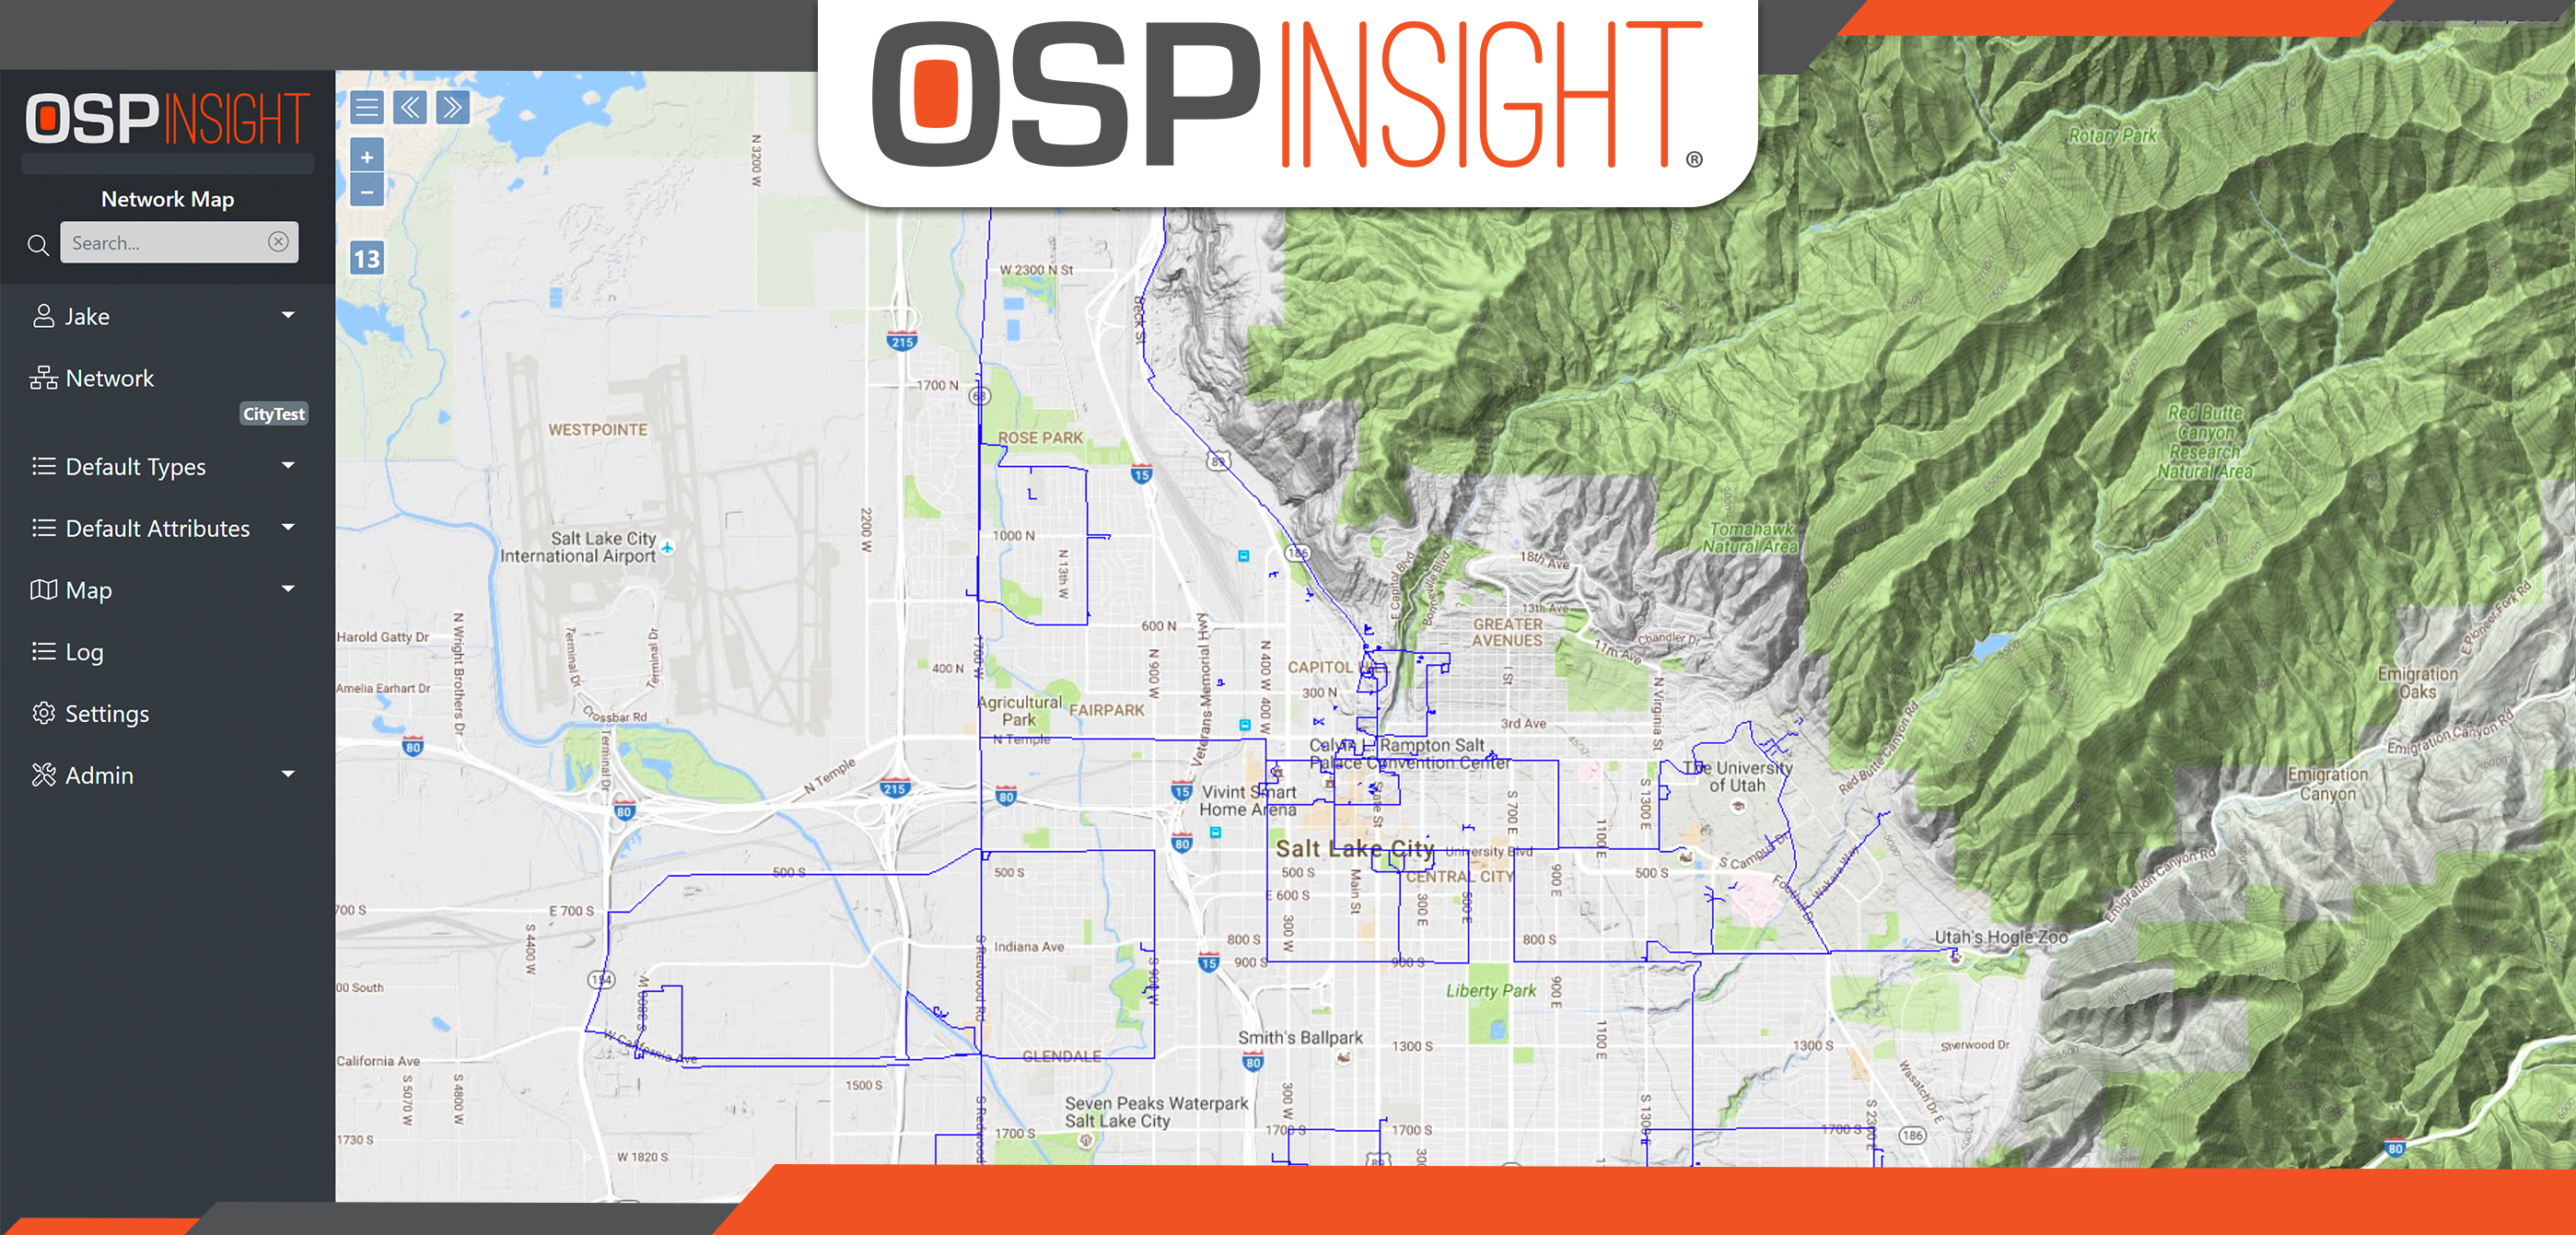 Press-Release-OSPInsight-Releases-Version-9.3(featured-image)